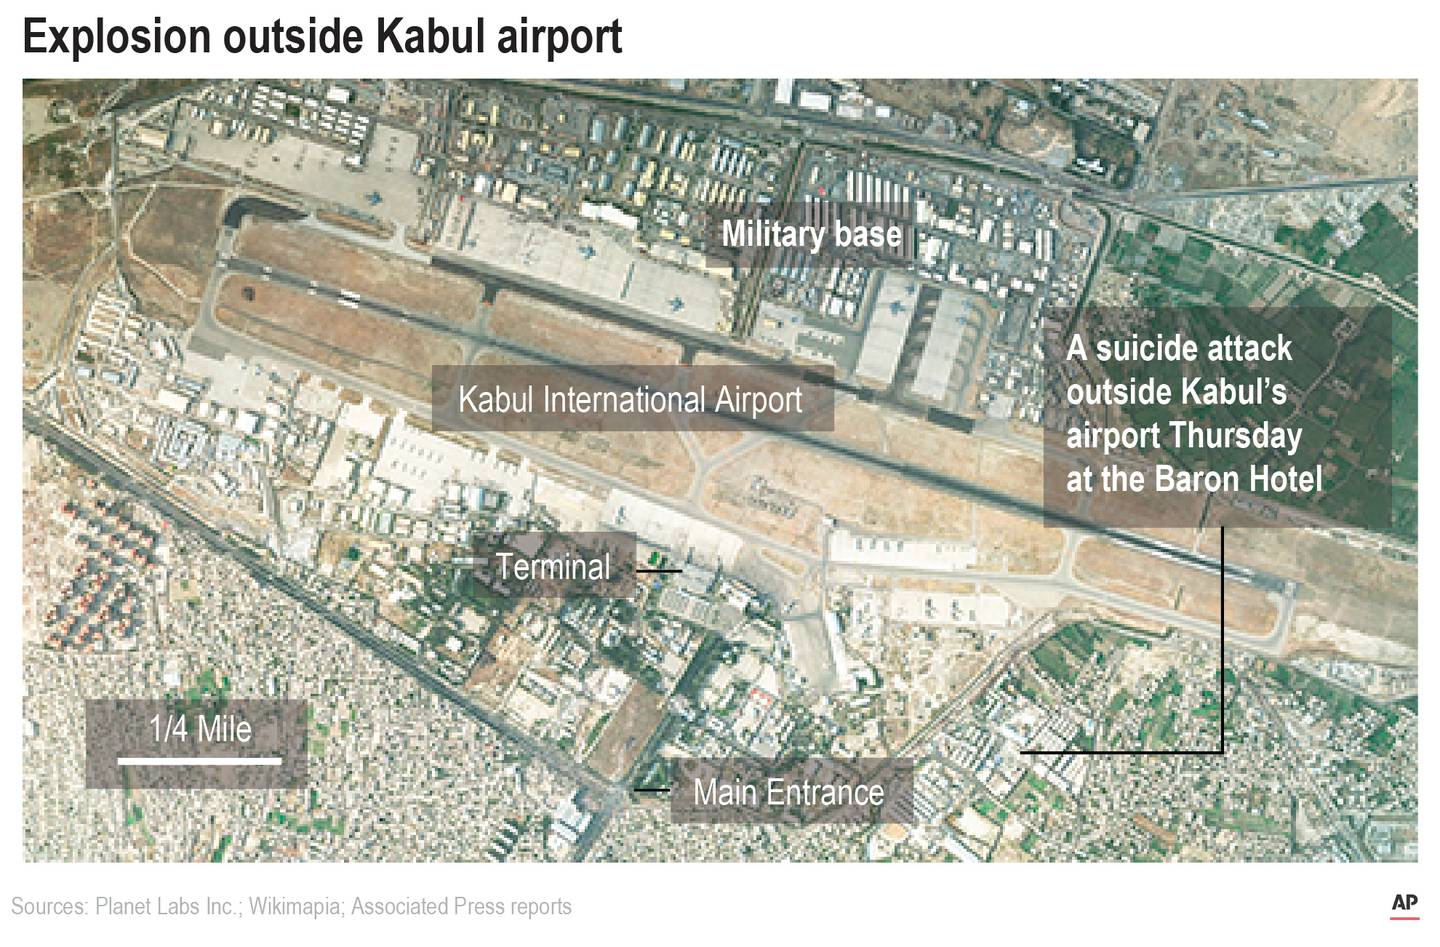 Satellite image shows Kabul International Airport and the location of an explosion near the Abbey Gate. (Planet Labs/Associated Press)